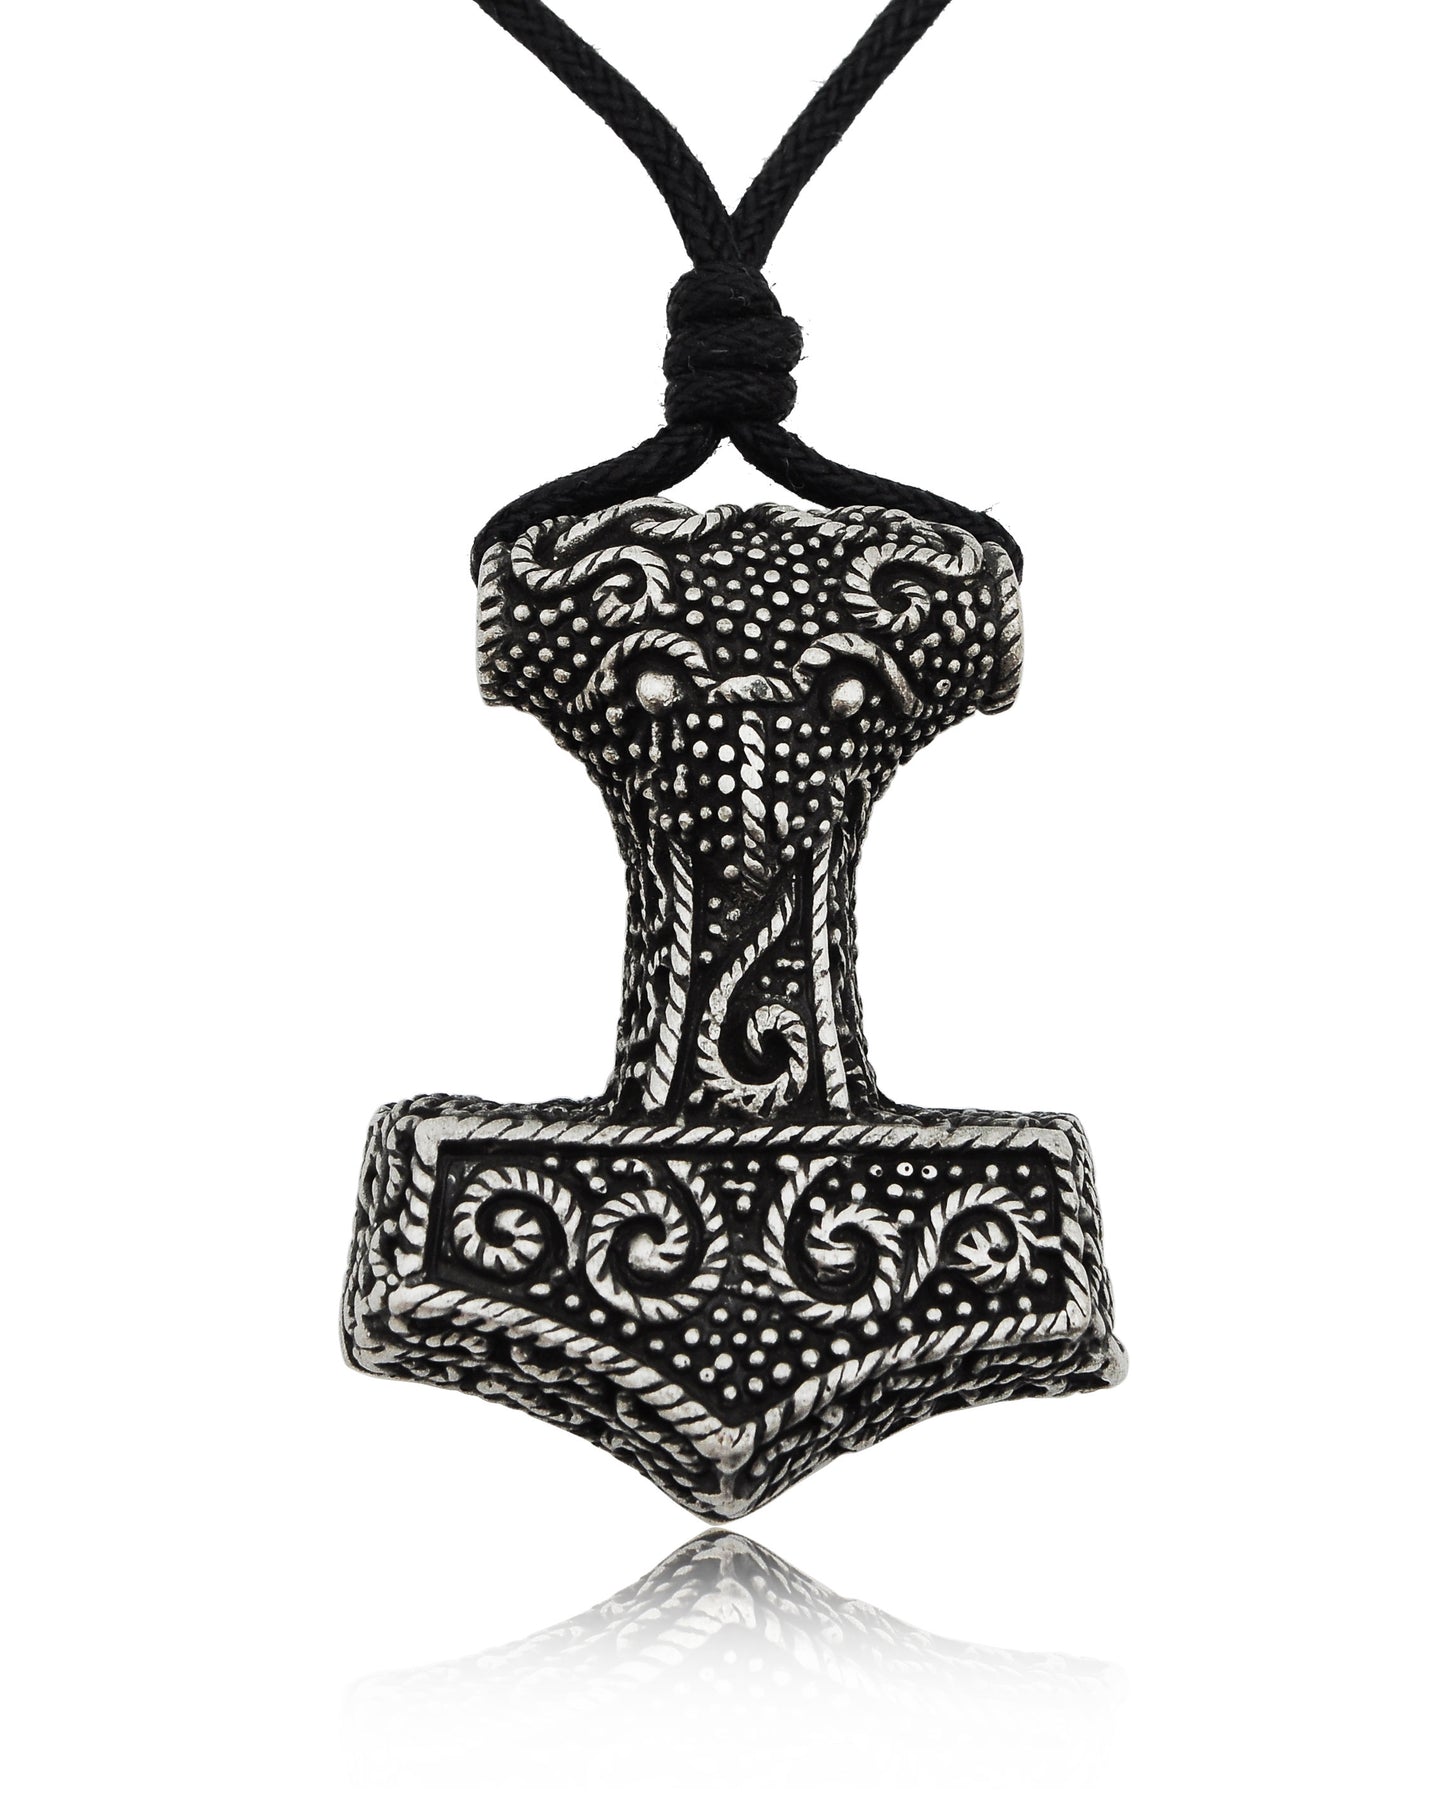 Thunder God Hammer Silver Pewter Gold Brass Charm Necklace Pendant Jewelry